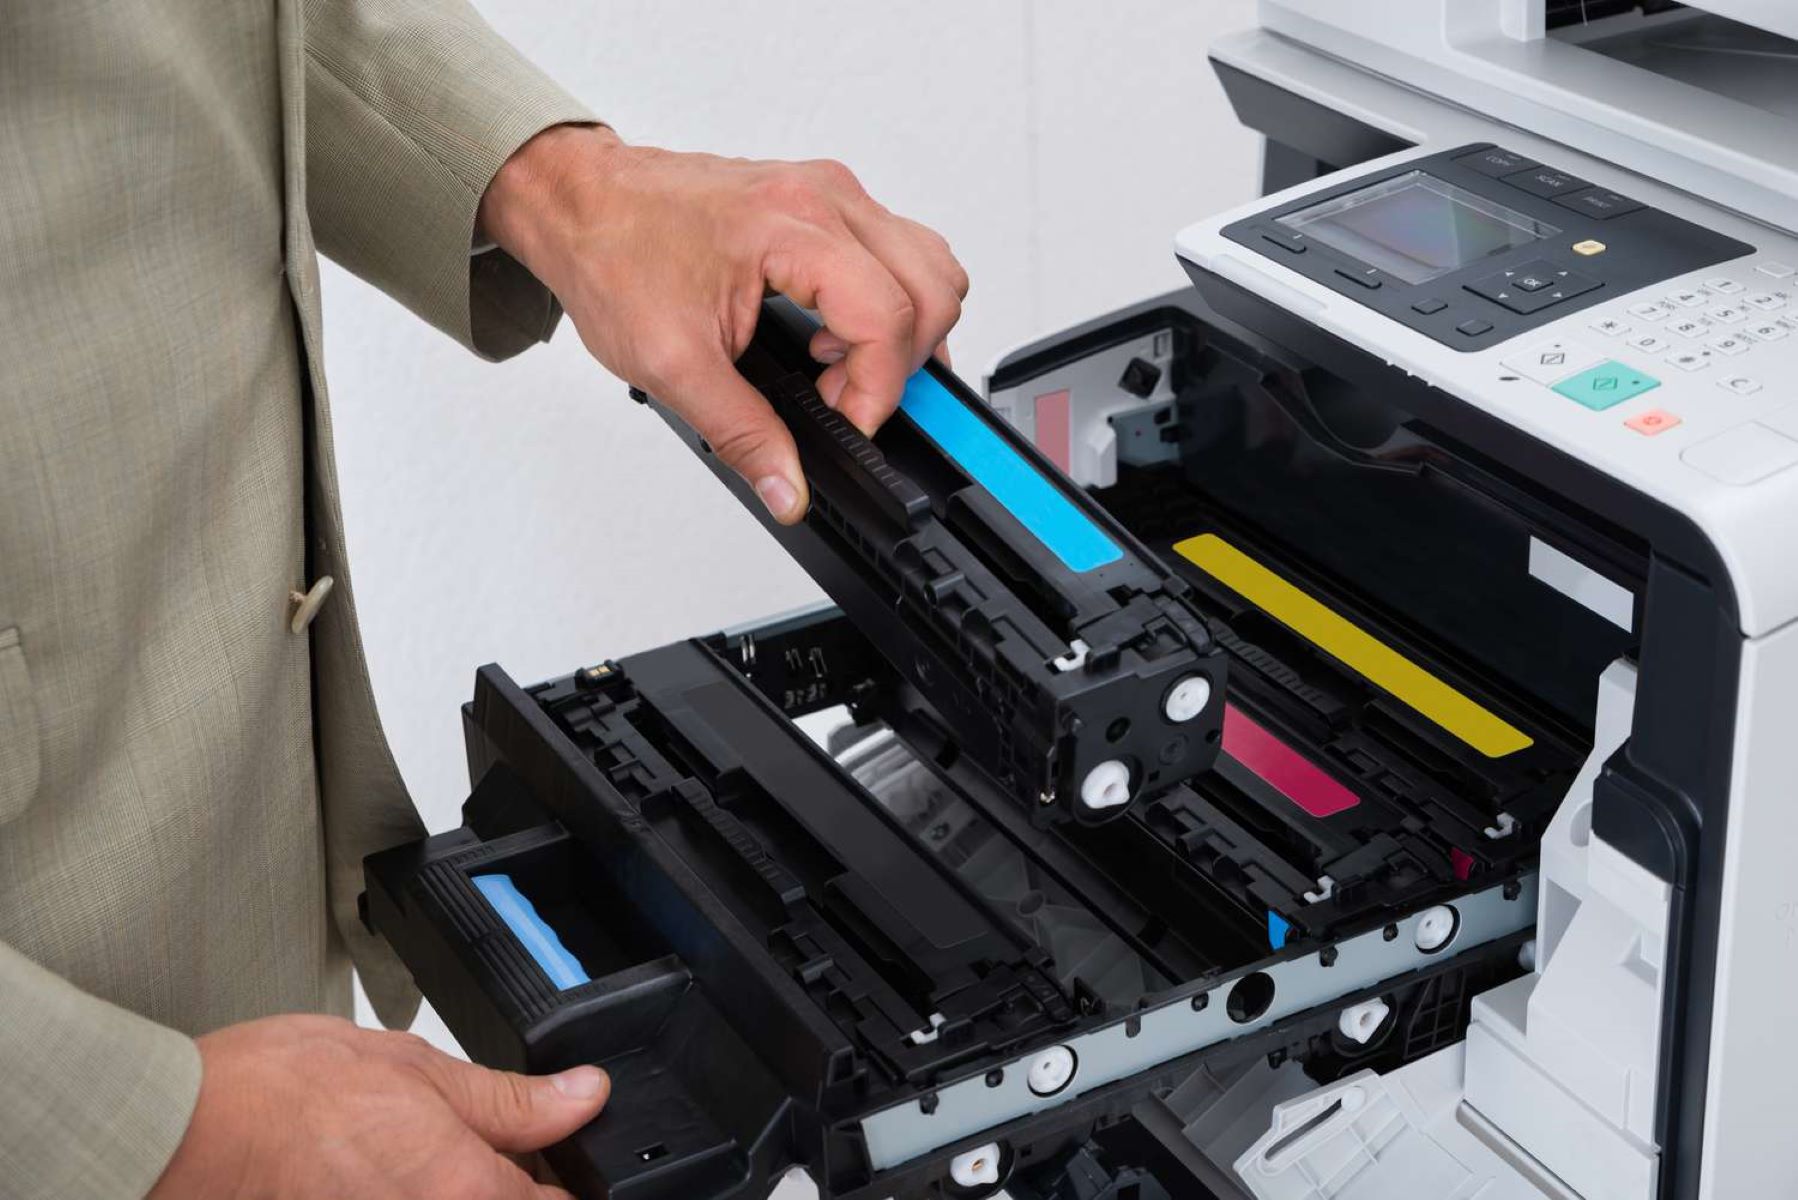 How To Load Ink Cartridge In A HP Printer